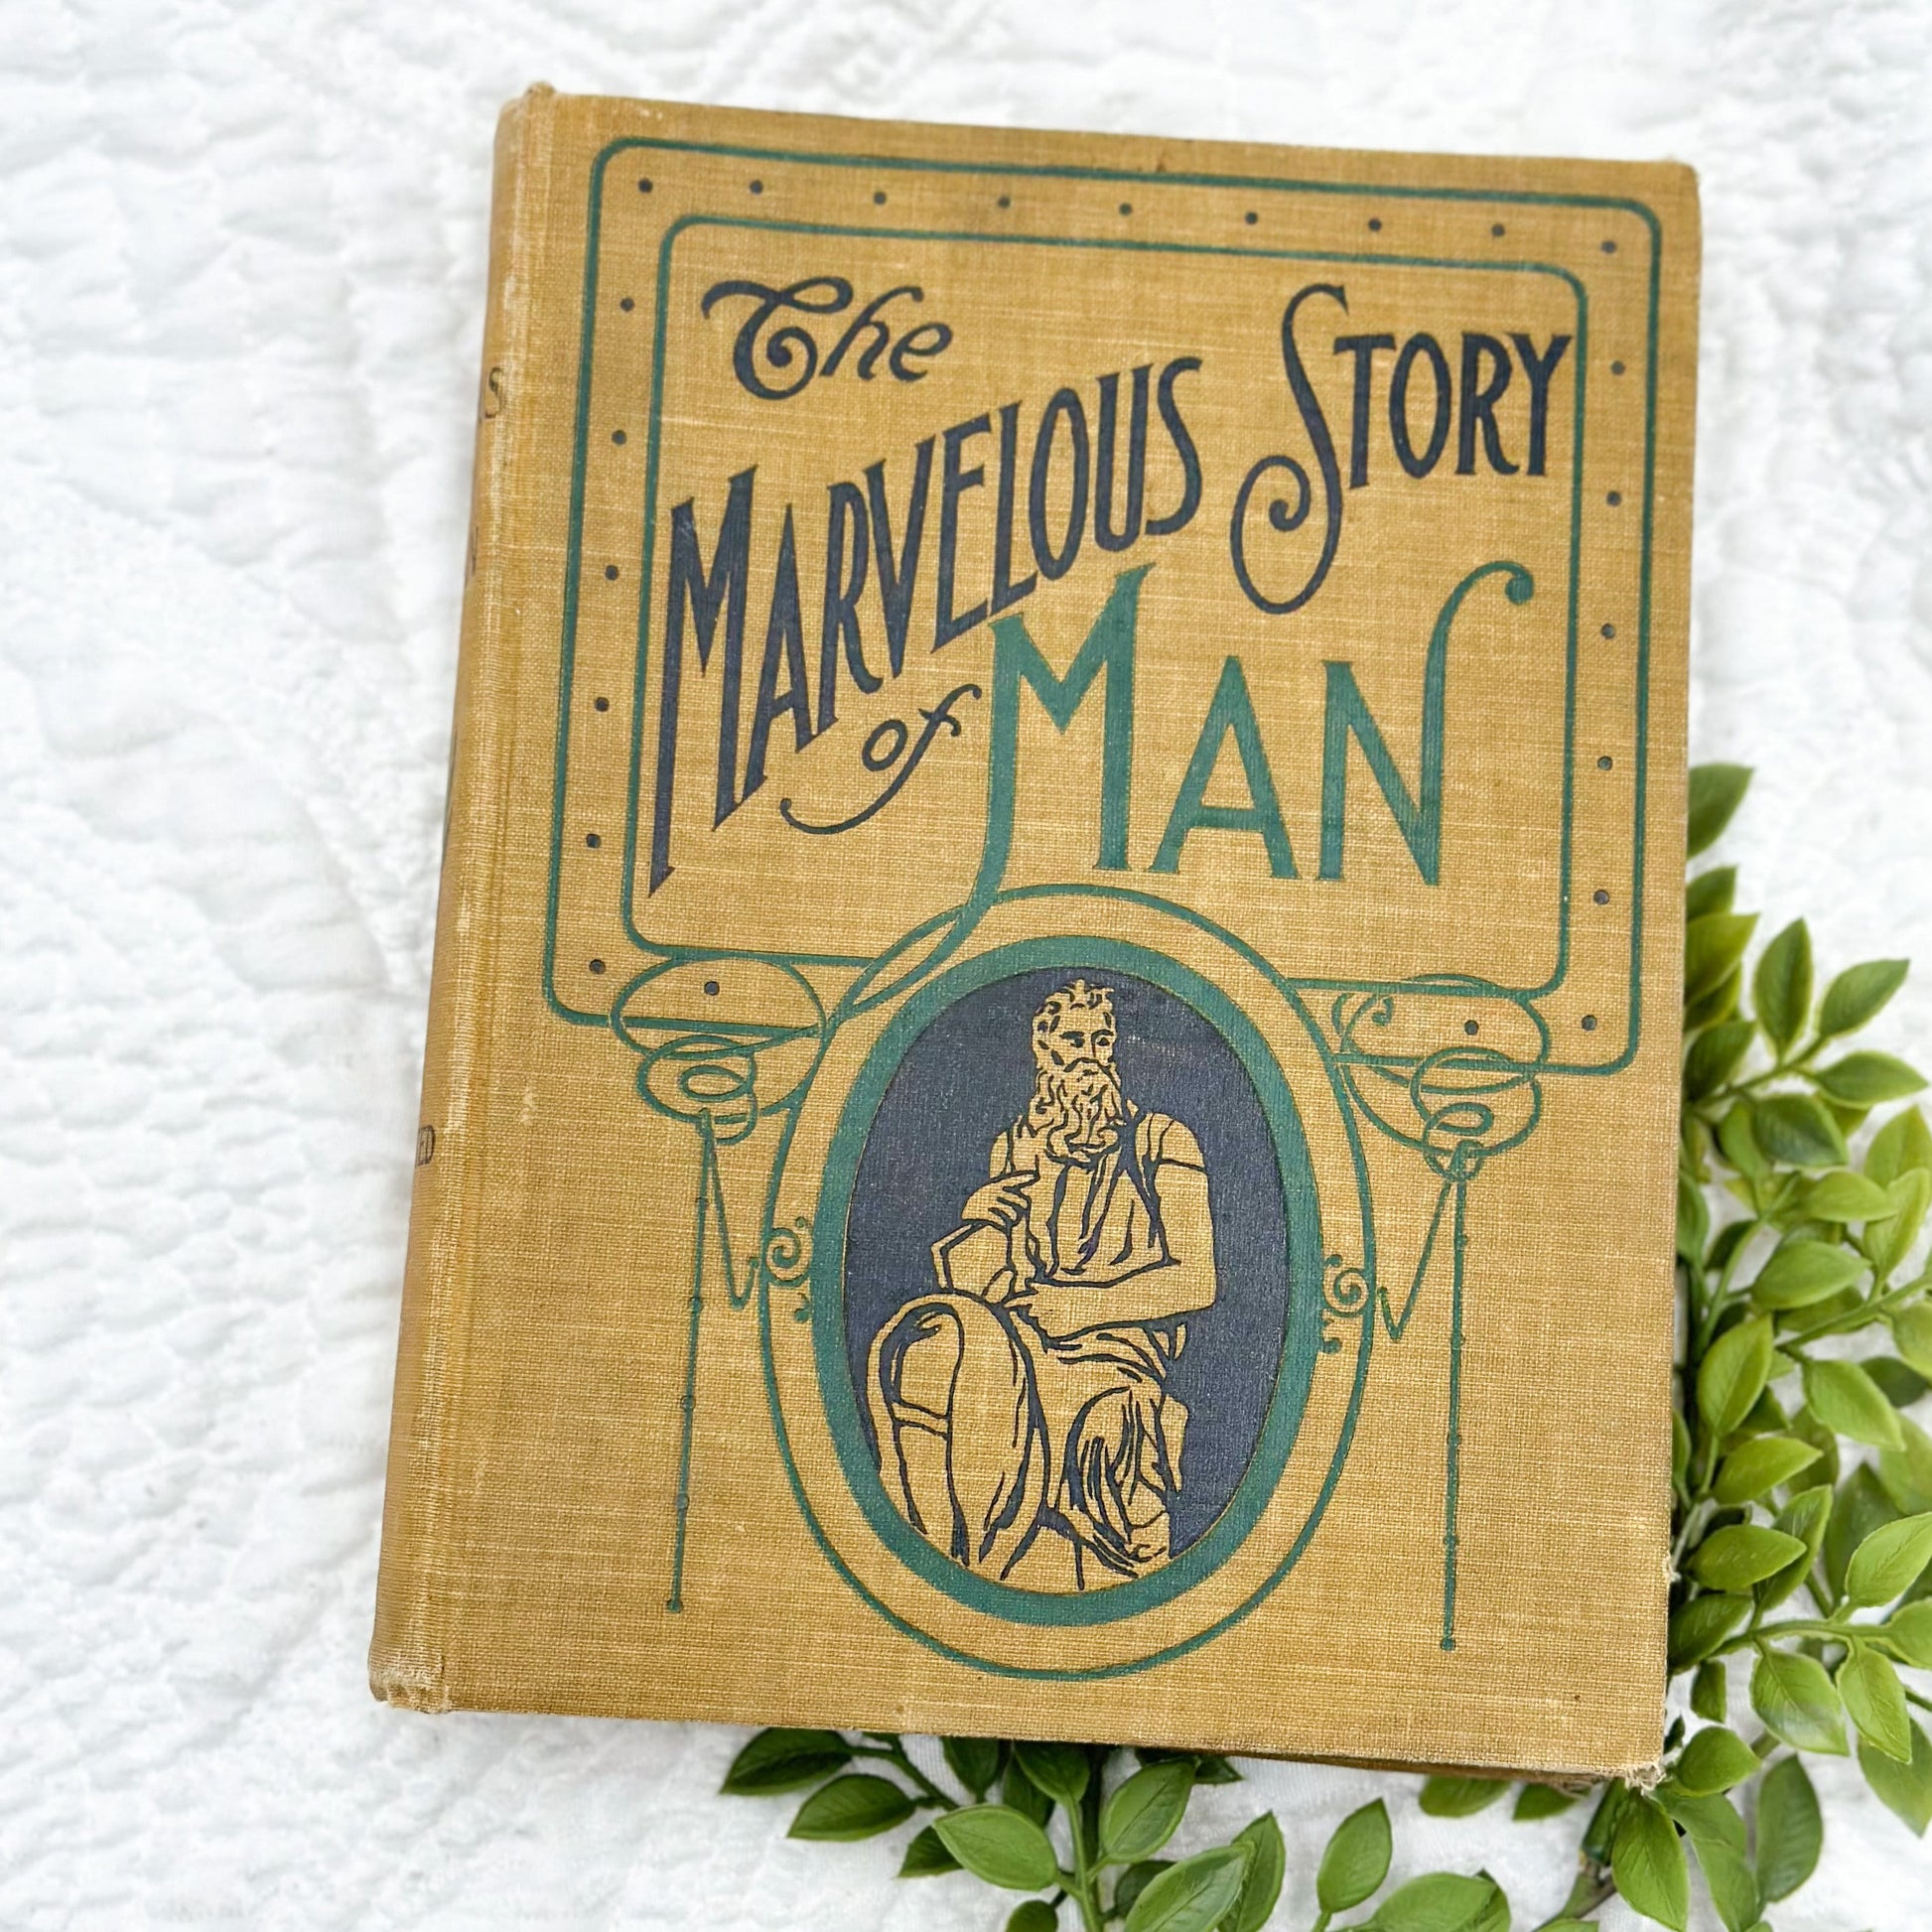 The Marvelous Story of Man by G. Dallas Lind, M.D.